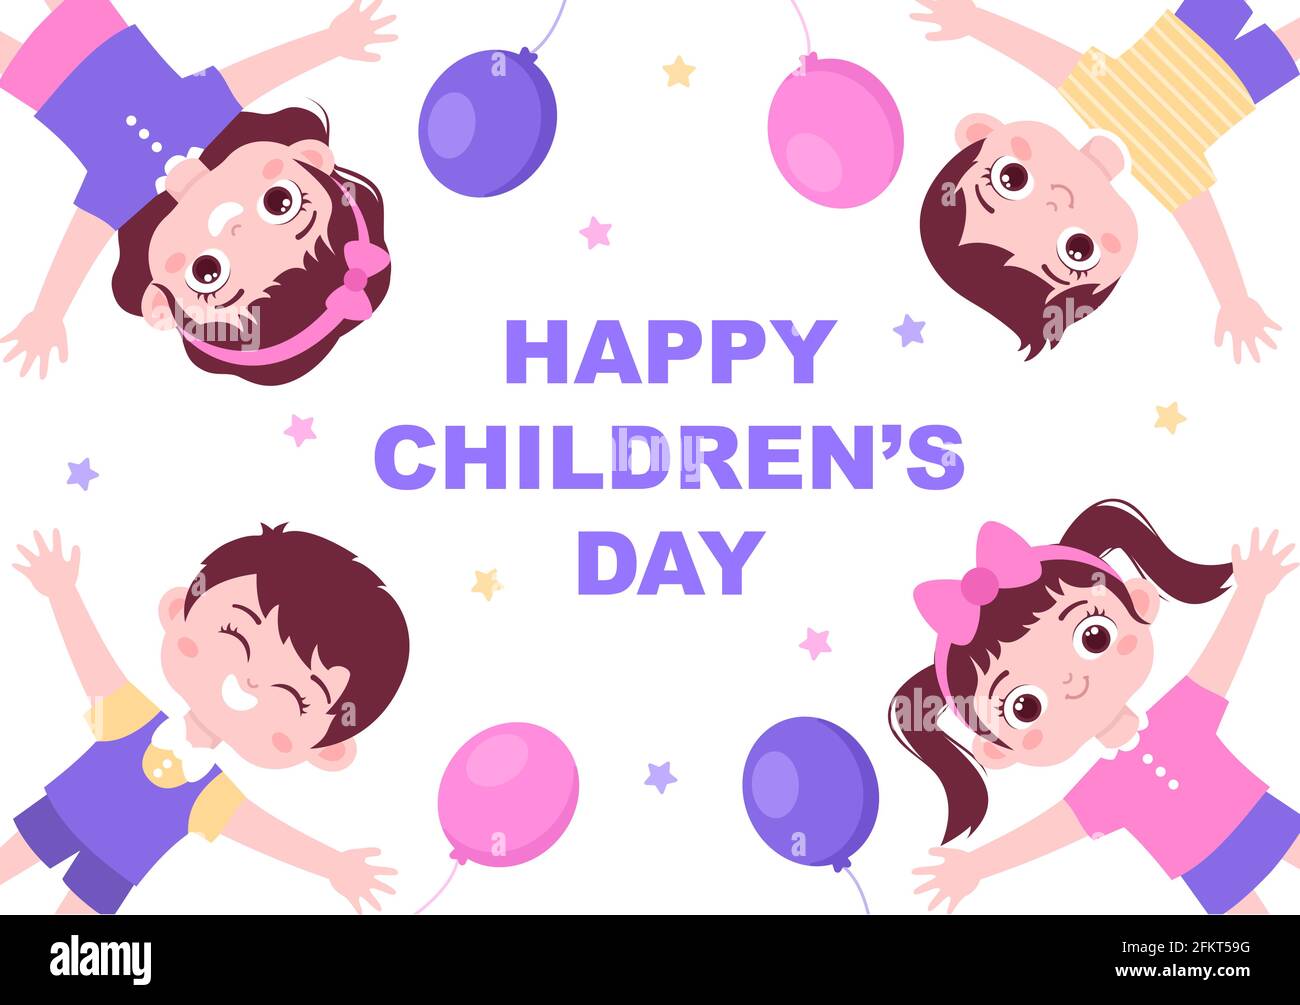 Happy Children's Day Celebration With Cartoon Character ...